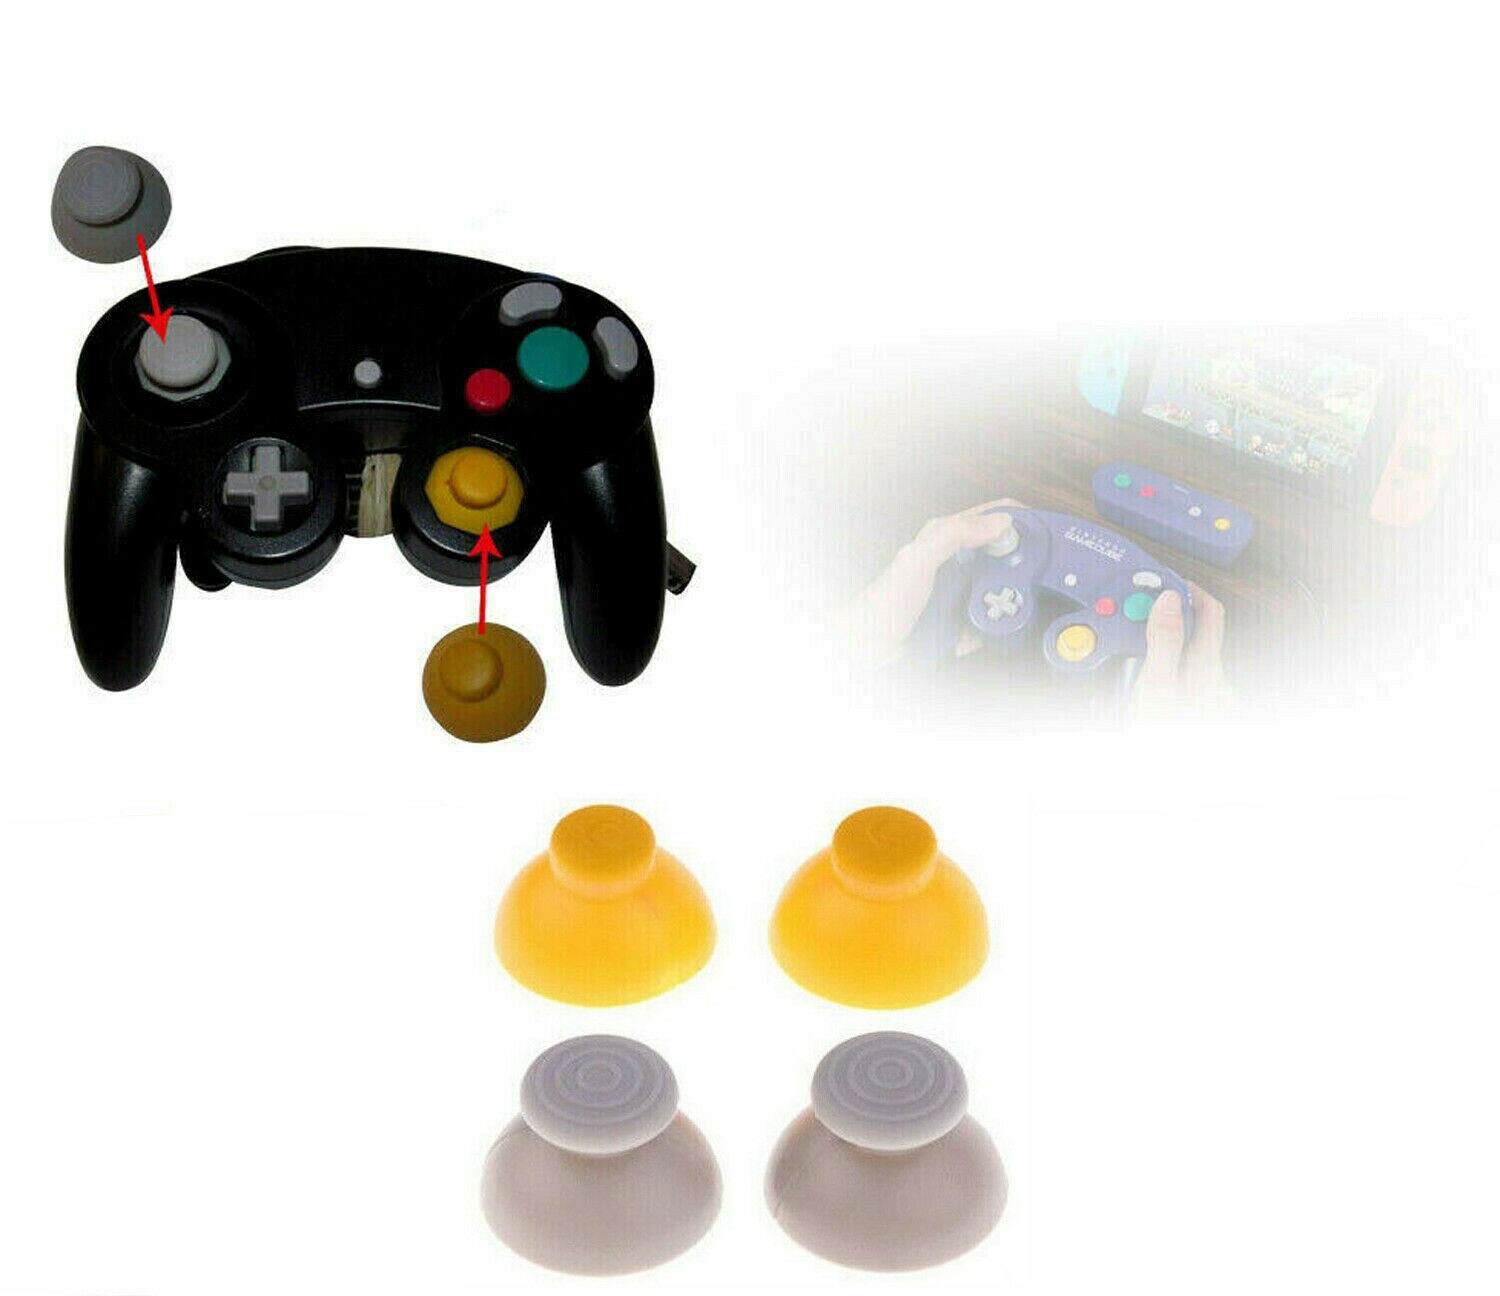 2 YELLOW + 2 GRAY  Thumbstick Joystick Caps For Gamecube Controller Unbranded Does not apply